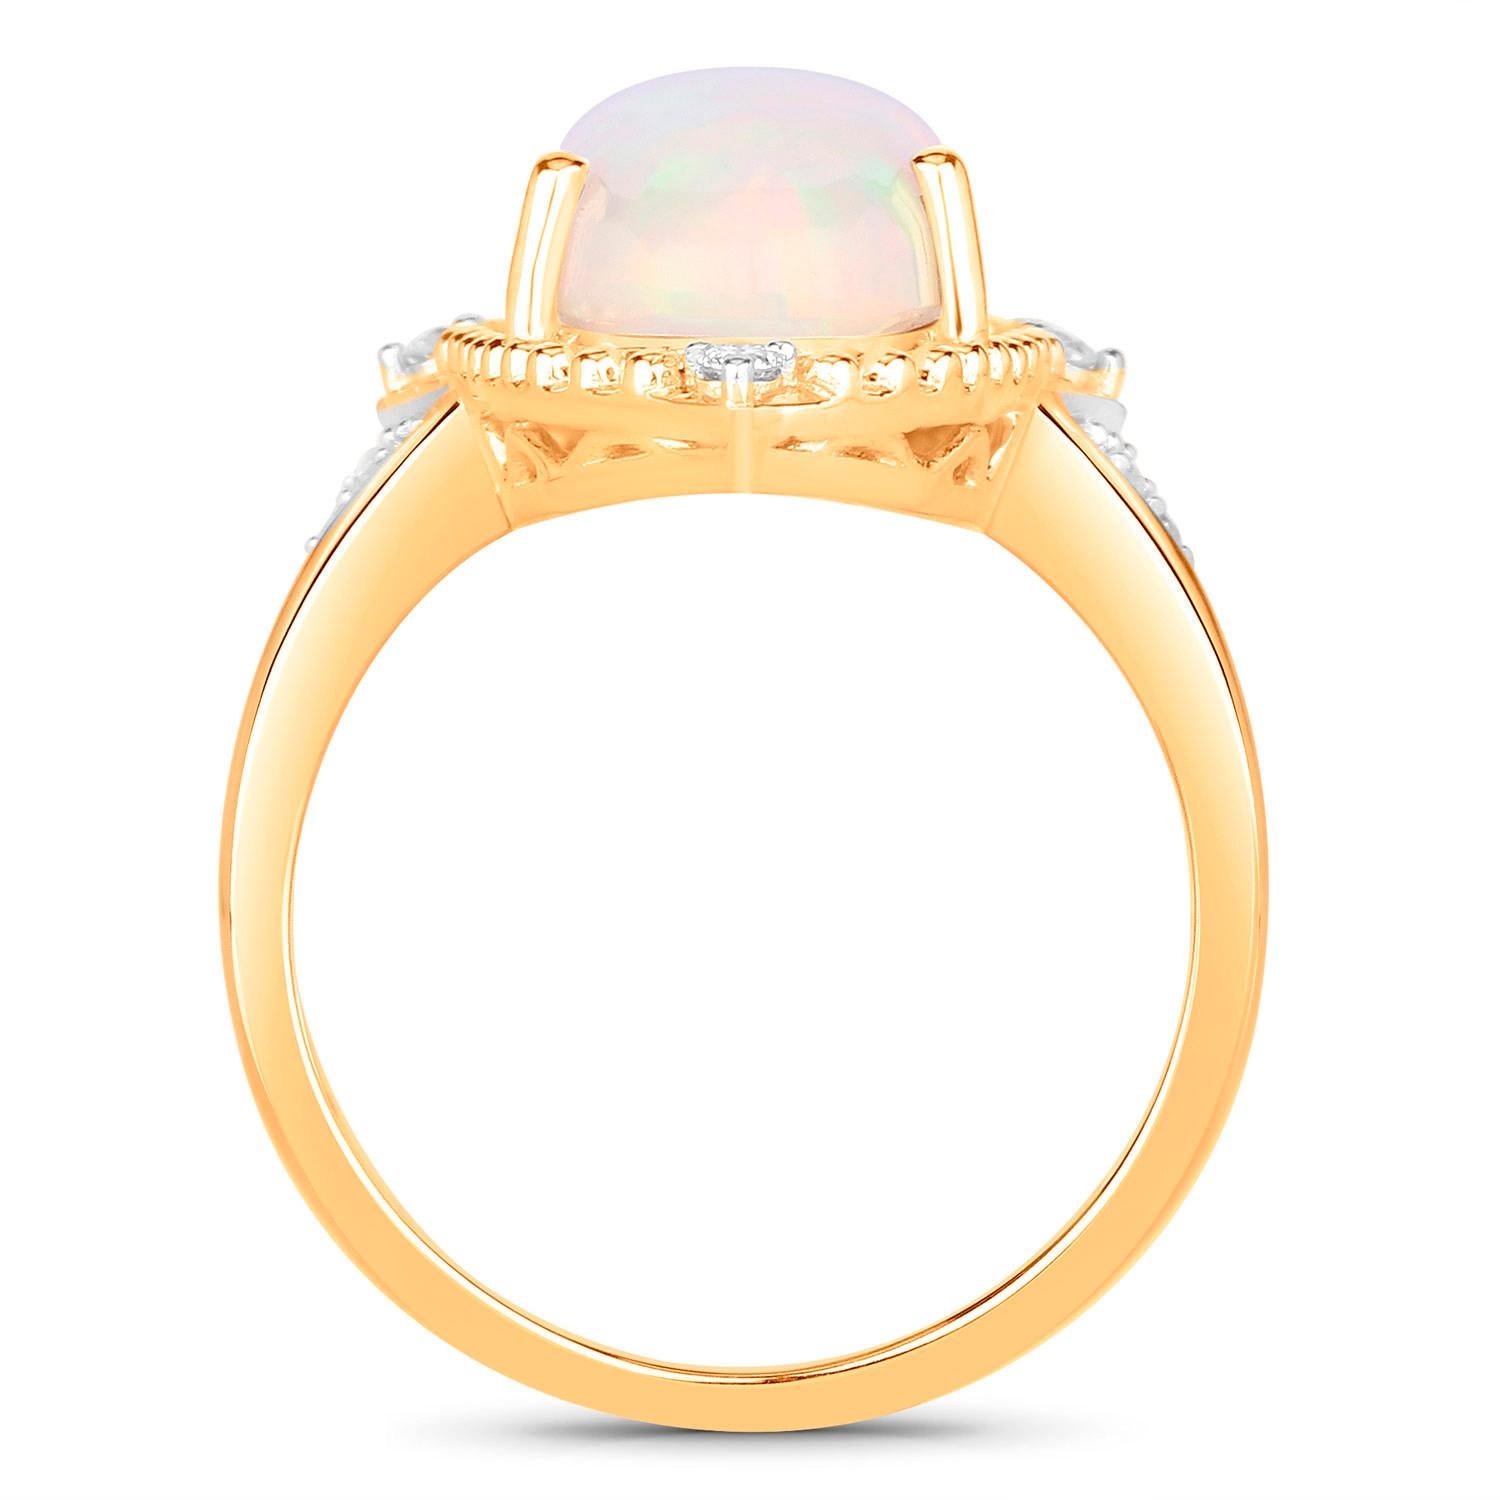 Natural Opal Cocktail Ring Diamond Setting 5.54 Carats 14K Yellow Gold In Excellent Condition For Sale In Laguna Niguel, CA